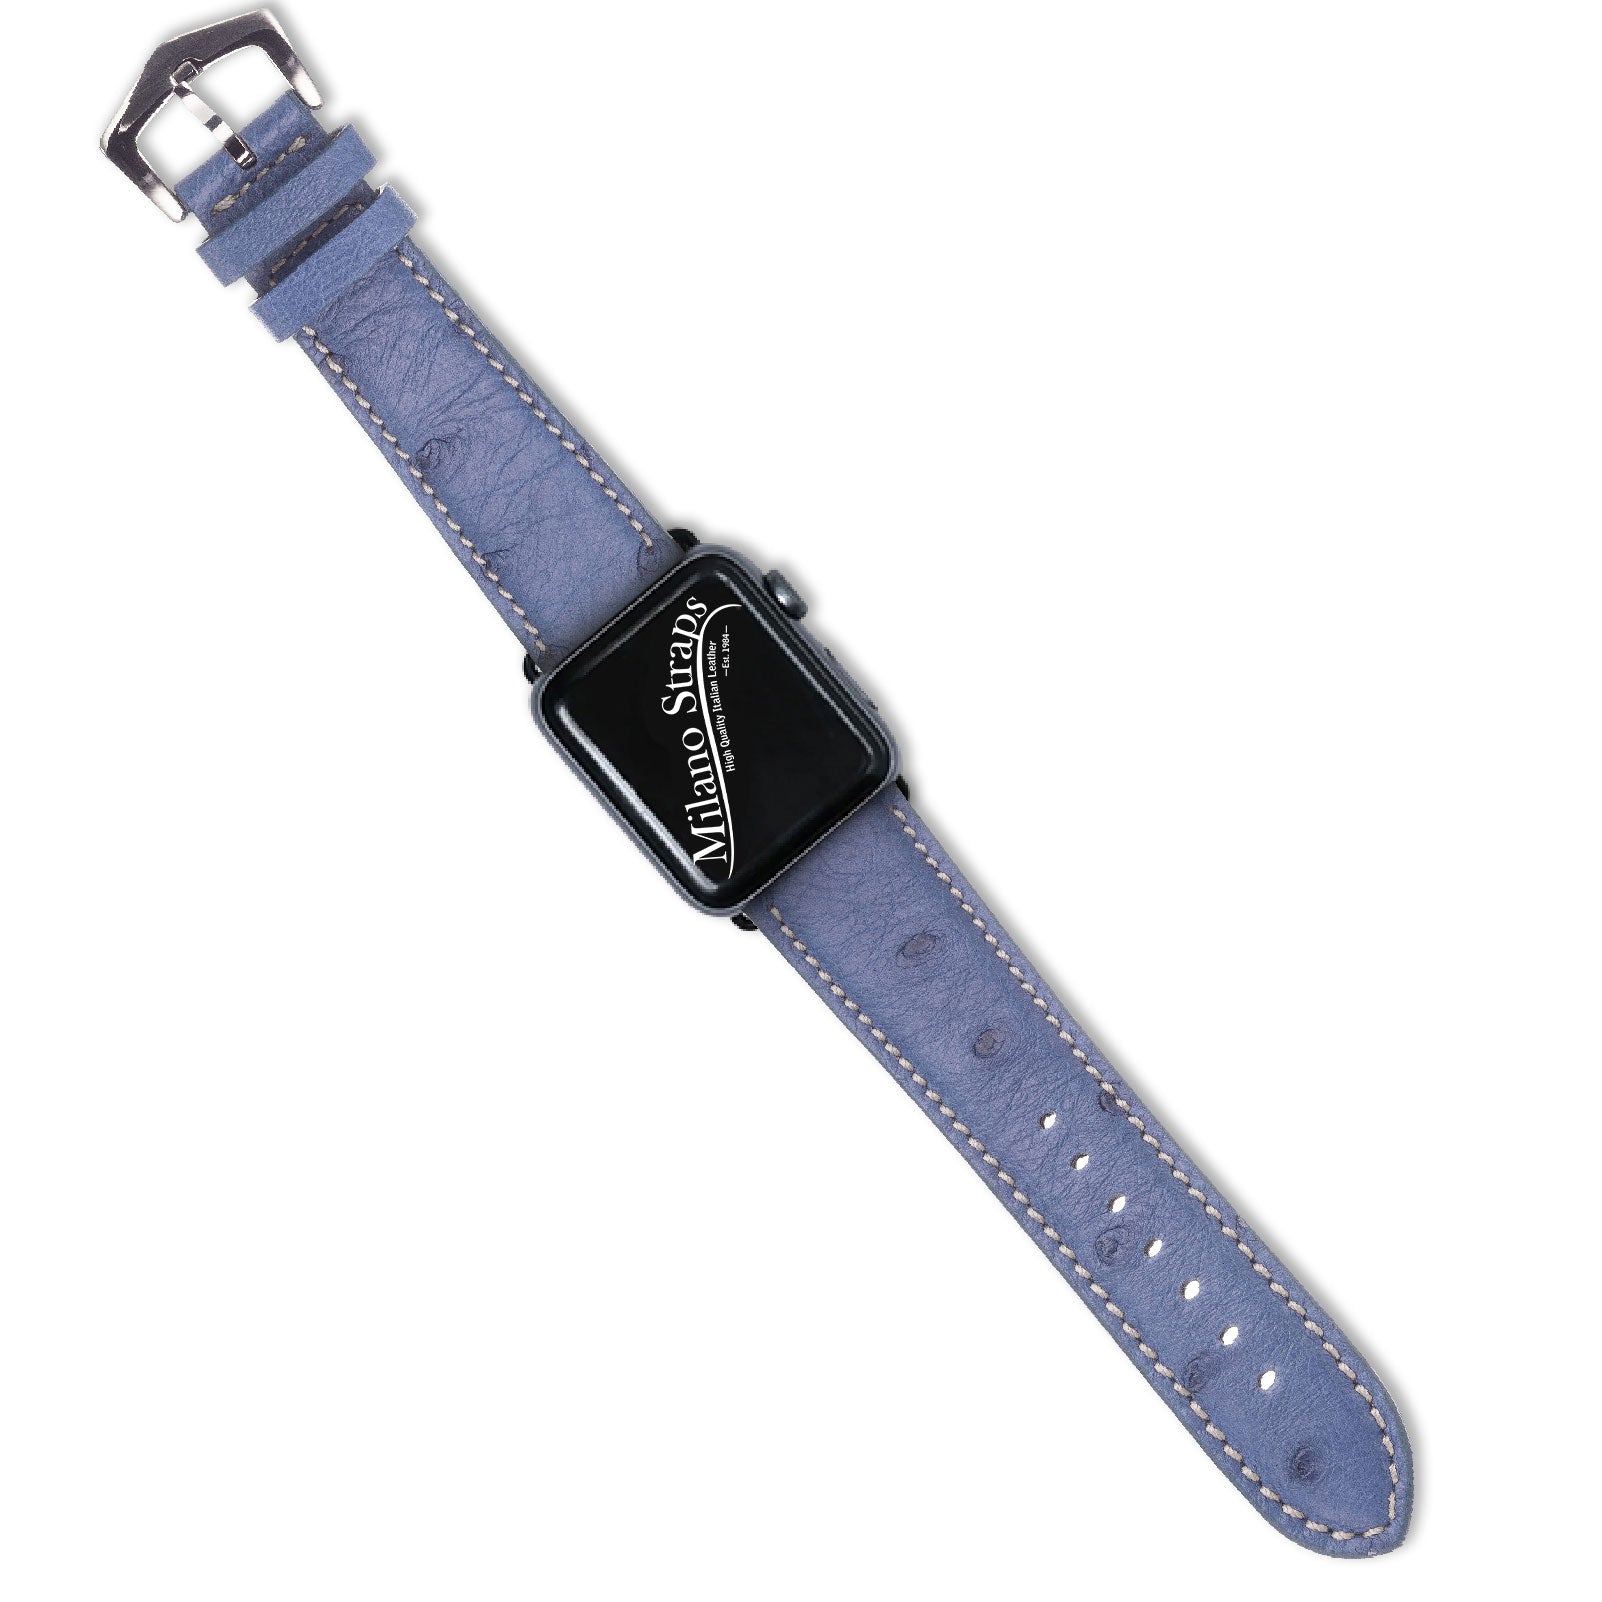 Apple Watch Leather Band ™ Light Blue Ostrich Leather Strap - Milano Straps